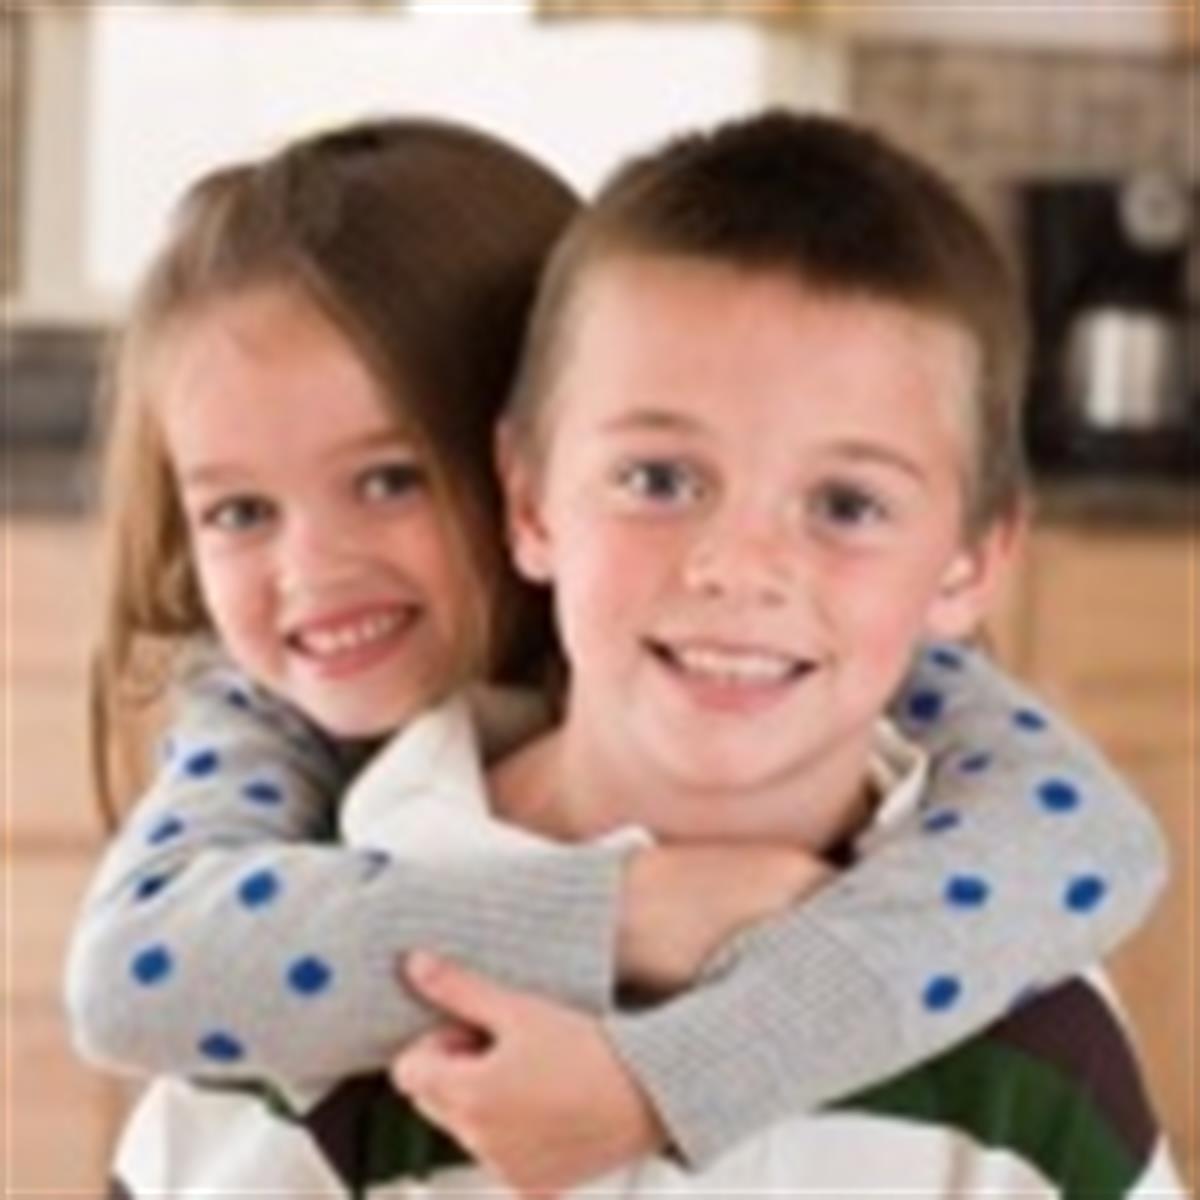 Types of Sibling Relationships - HealthyChildren.org